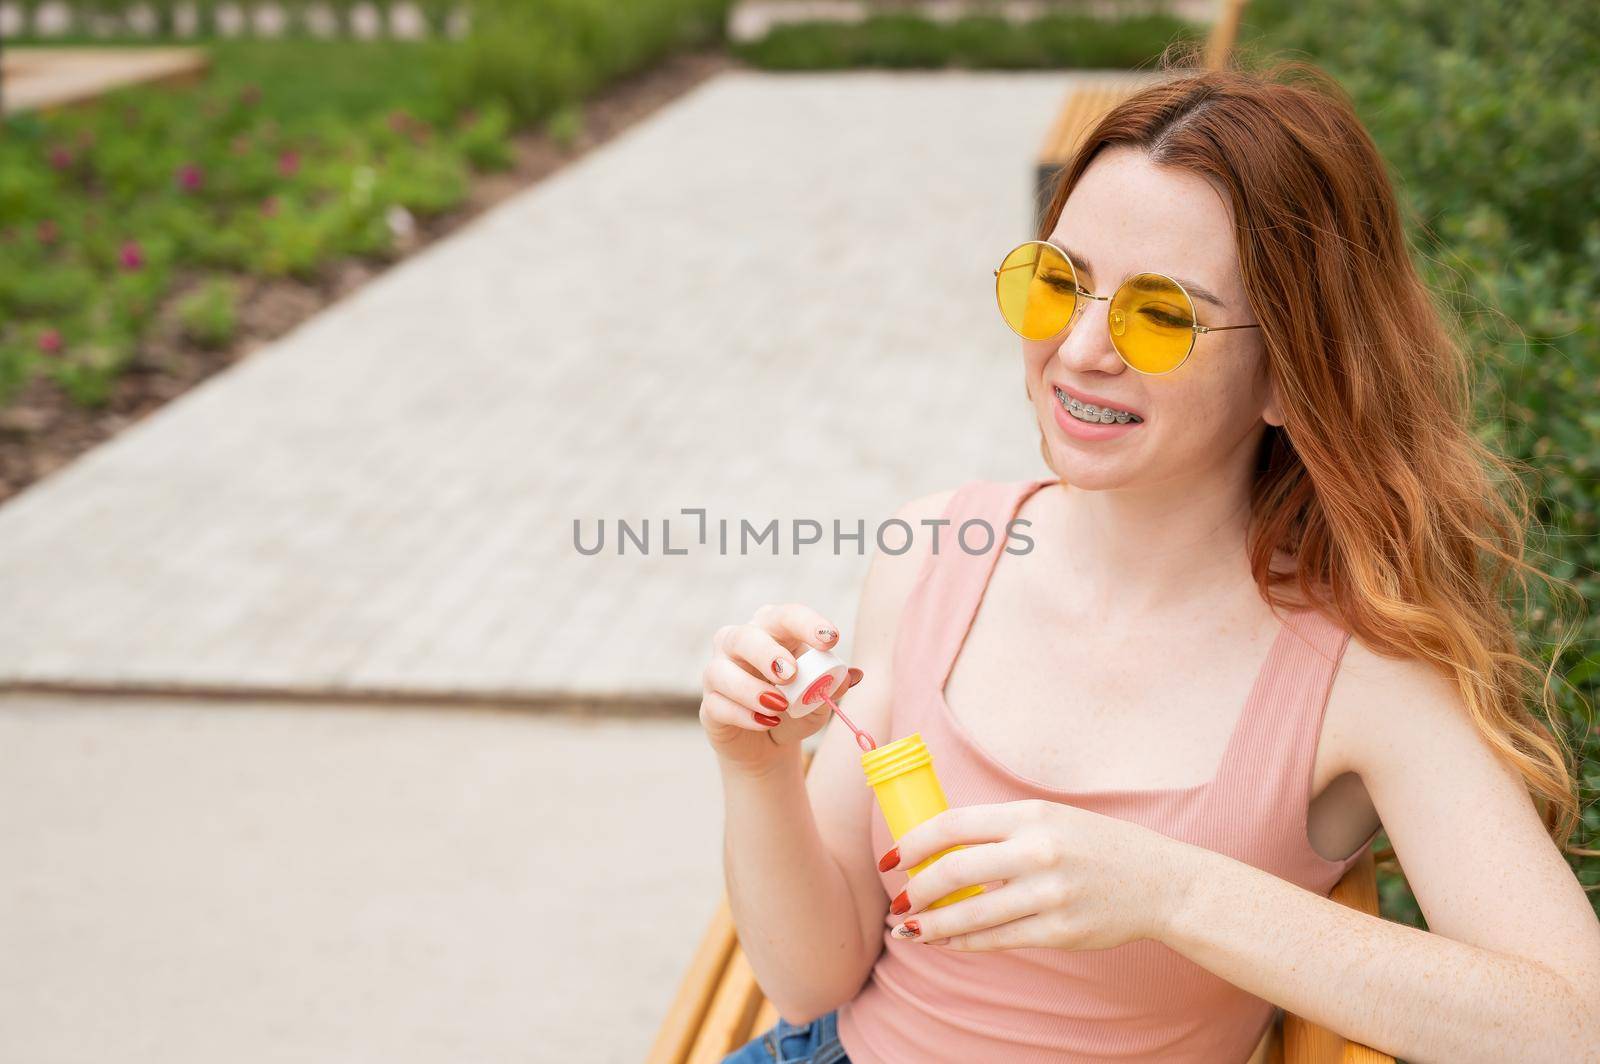 Young red-haired woman blowing soap bubbles outdoors. Girl in yellow sunglasses and braces. by mrwed54